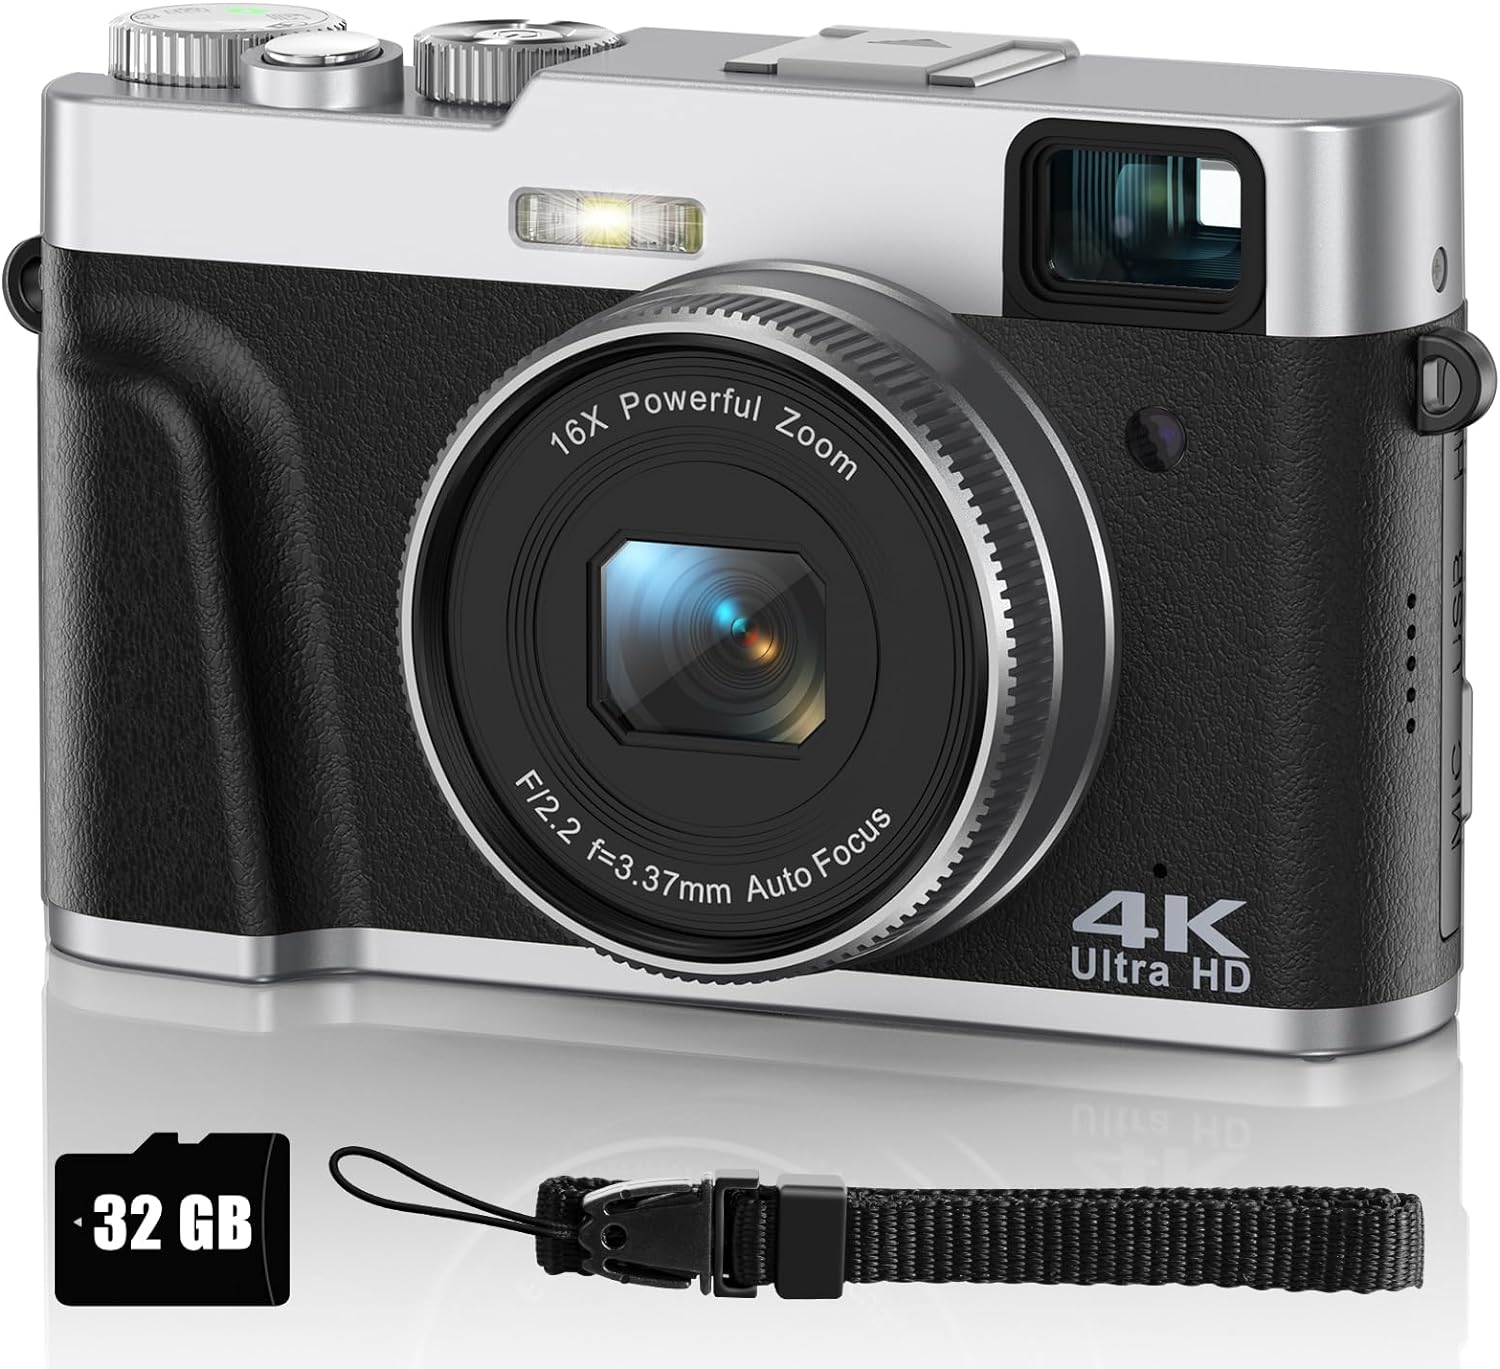 VAHOIALD 4K Digital Camera Review: Exceptional Image Quality at an Affordable Price